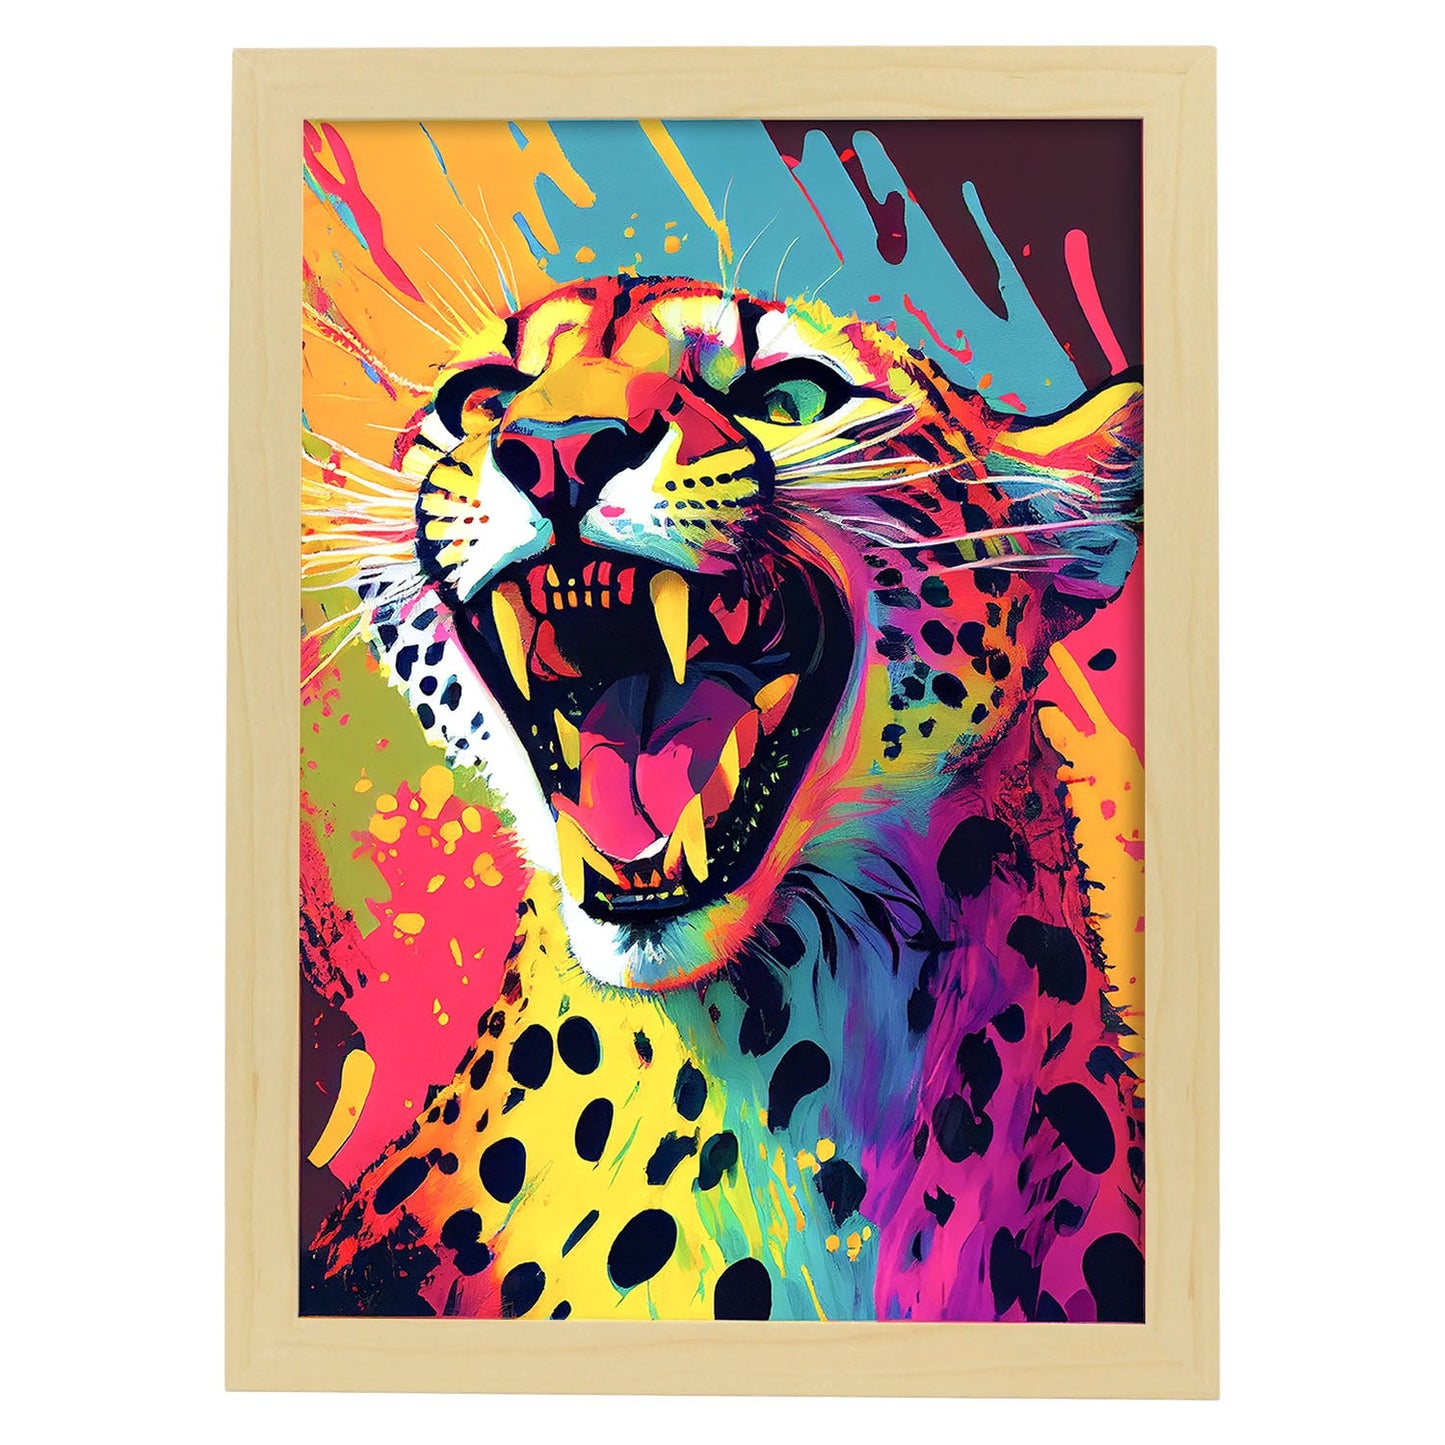 Nacnic Abstract smiling Cheetah in Lisa Fran Style_2. Aesthetic Wall Art Prints for Bedroom or Living Room Design.